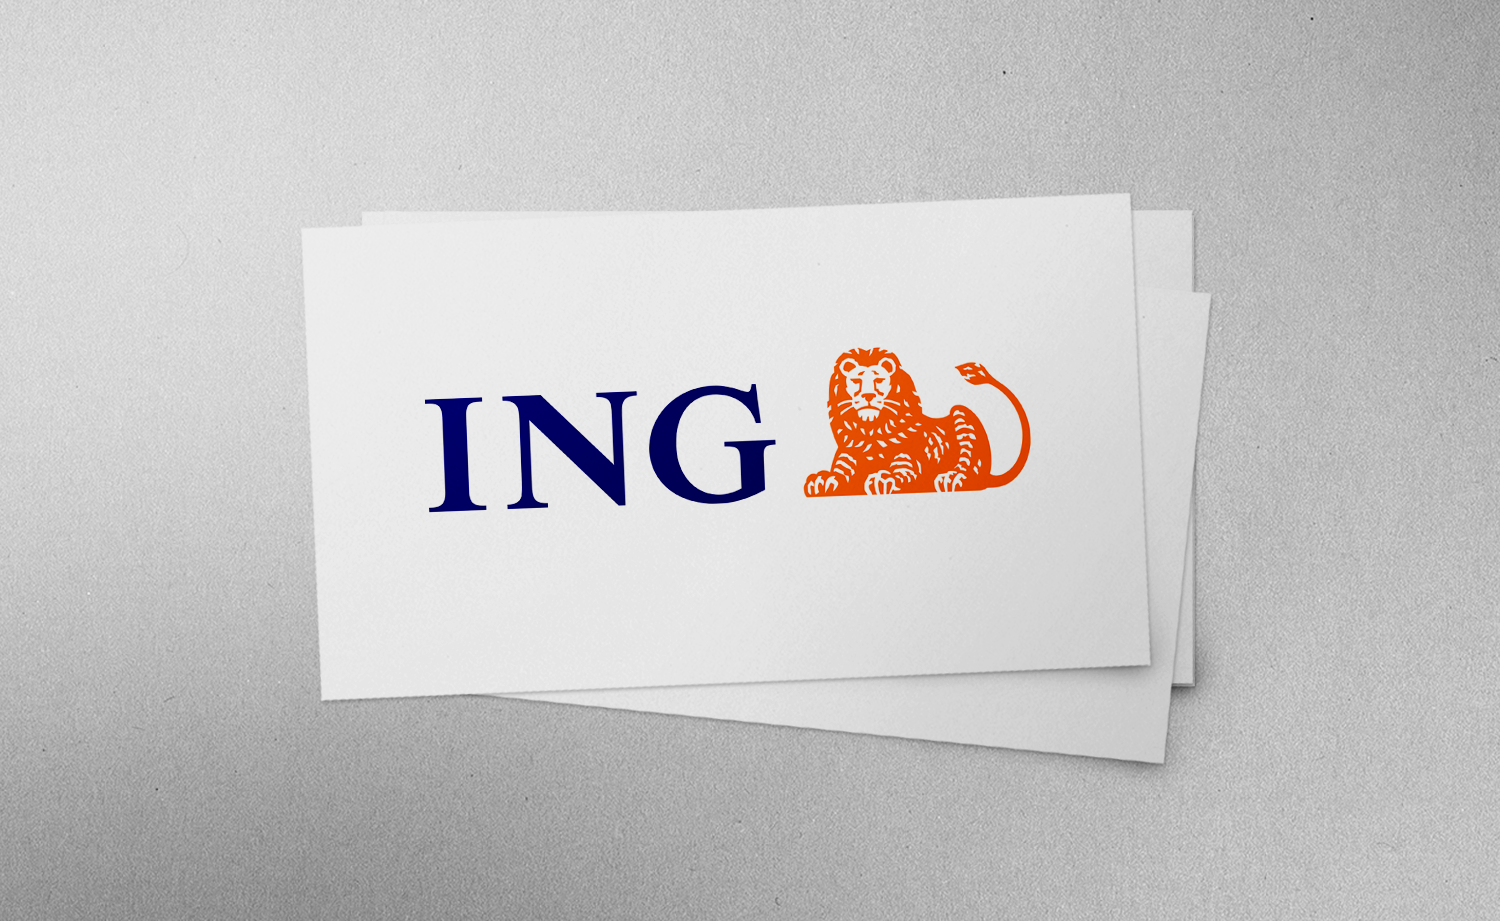 Another year of cooperation with ING